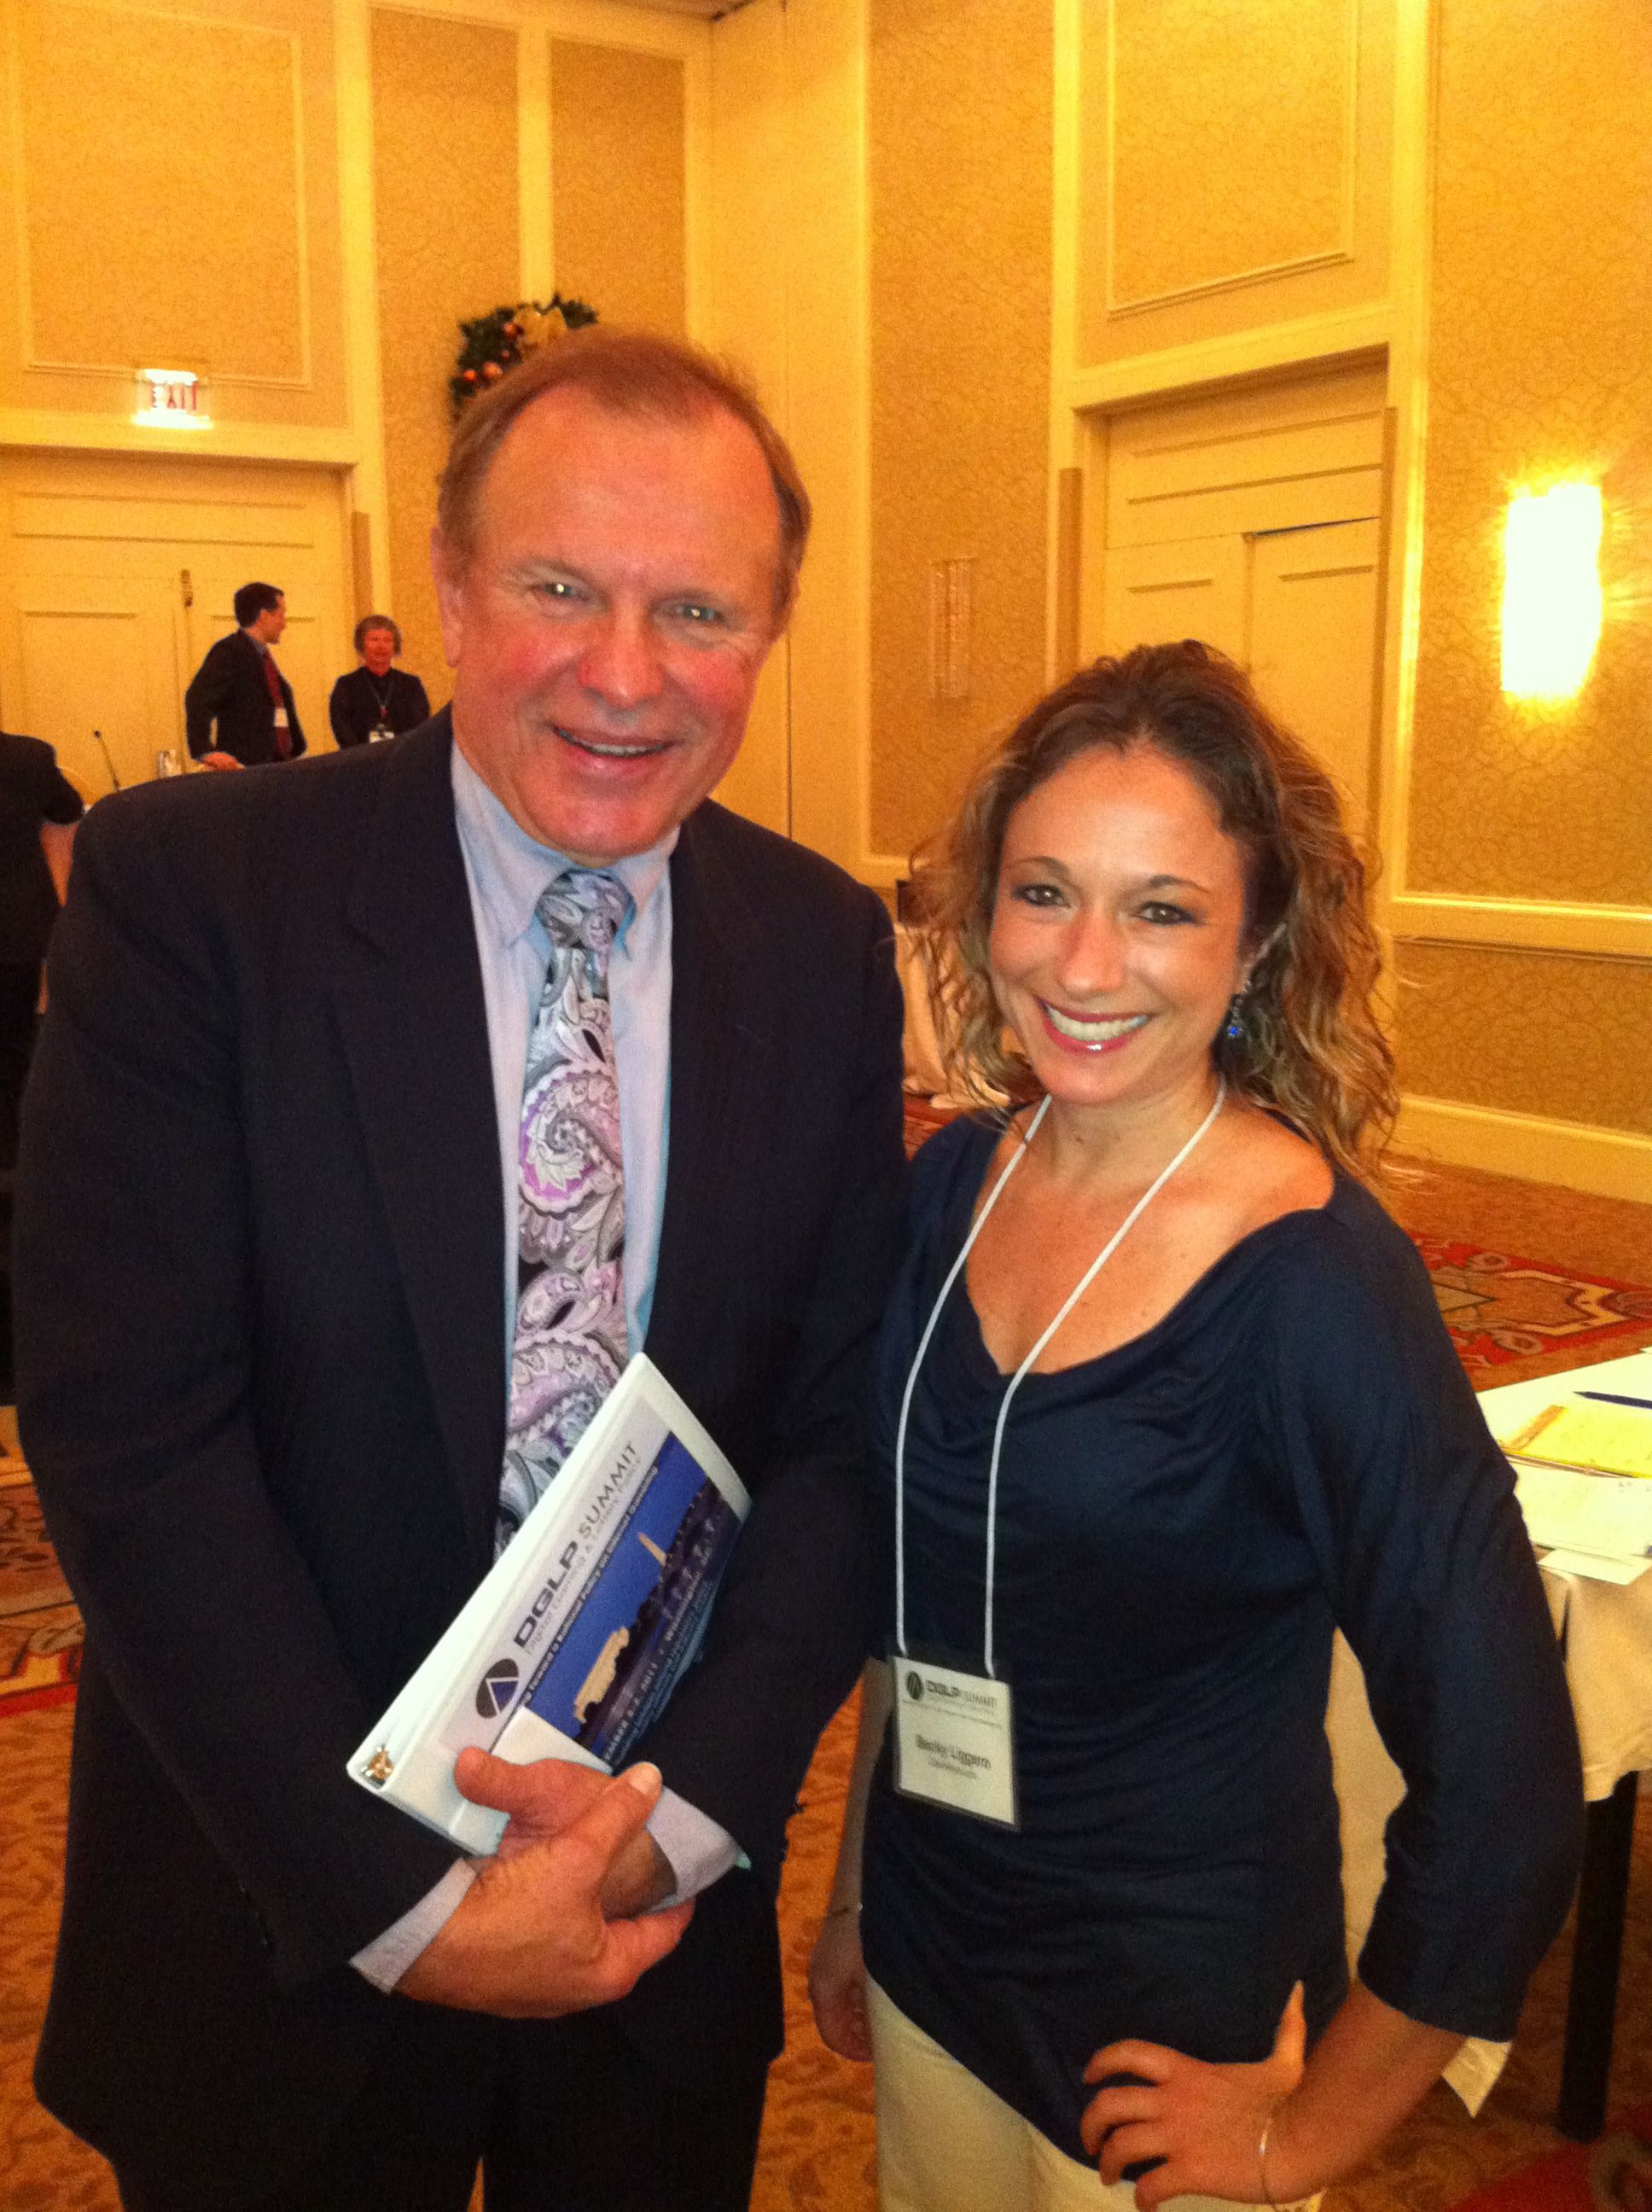 Senator Lesniak and Becky Liggero at The Digital Gaming & Lottery Policy Summit in DC